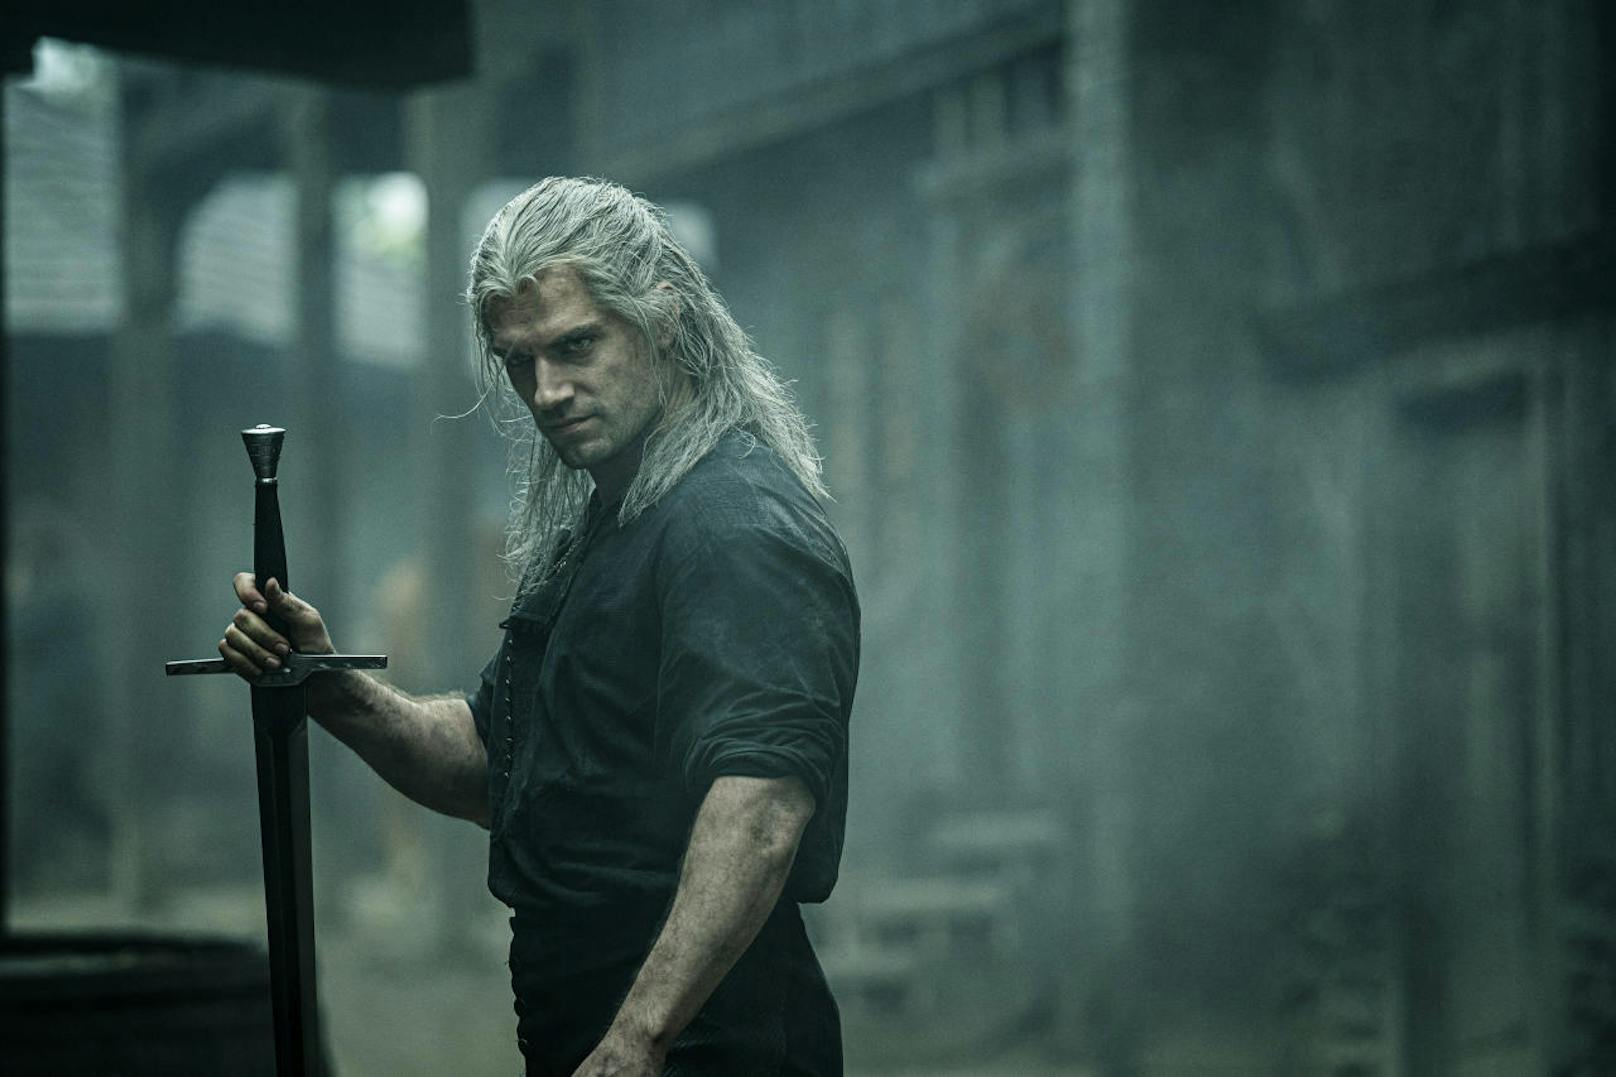 20.12. "The Witcher". Fantasyserie mit Henry Cavill.